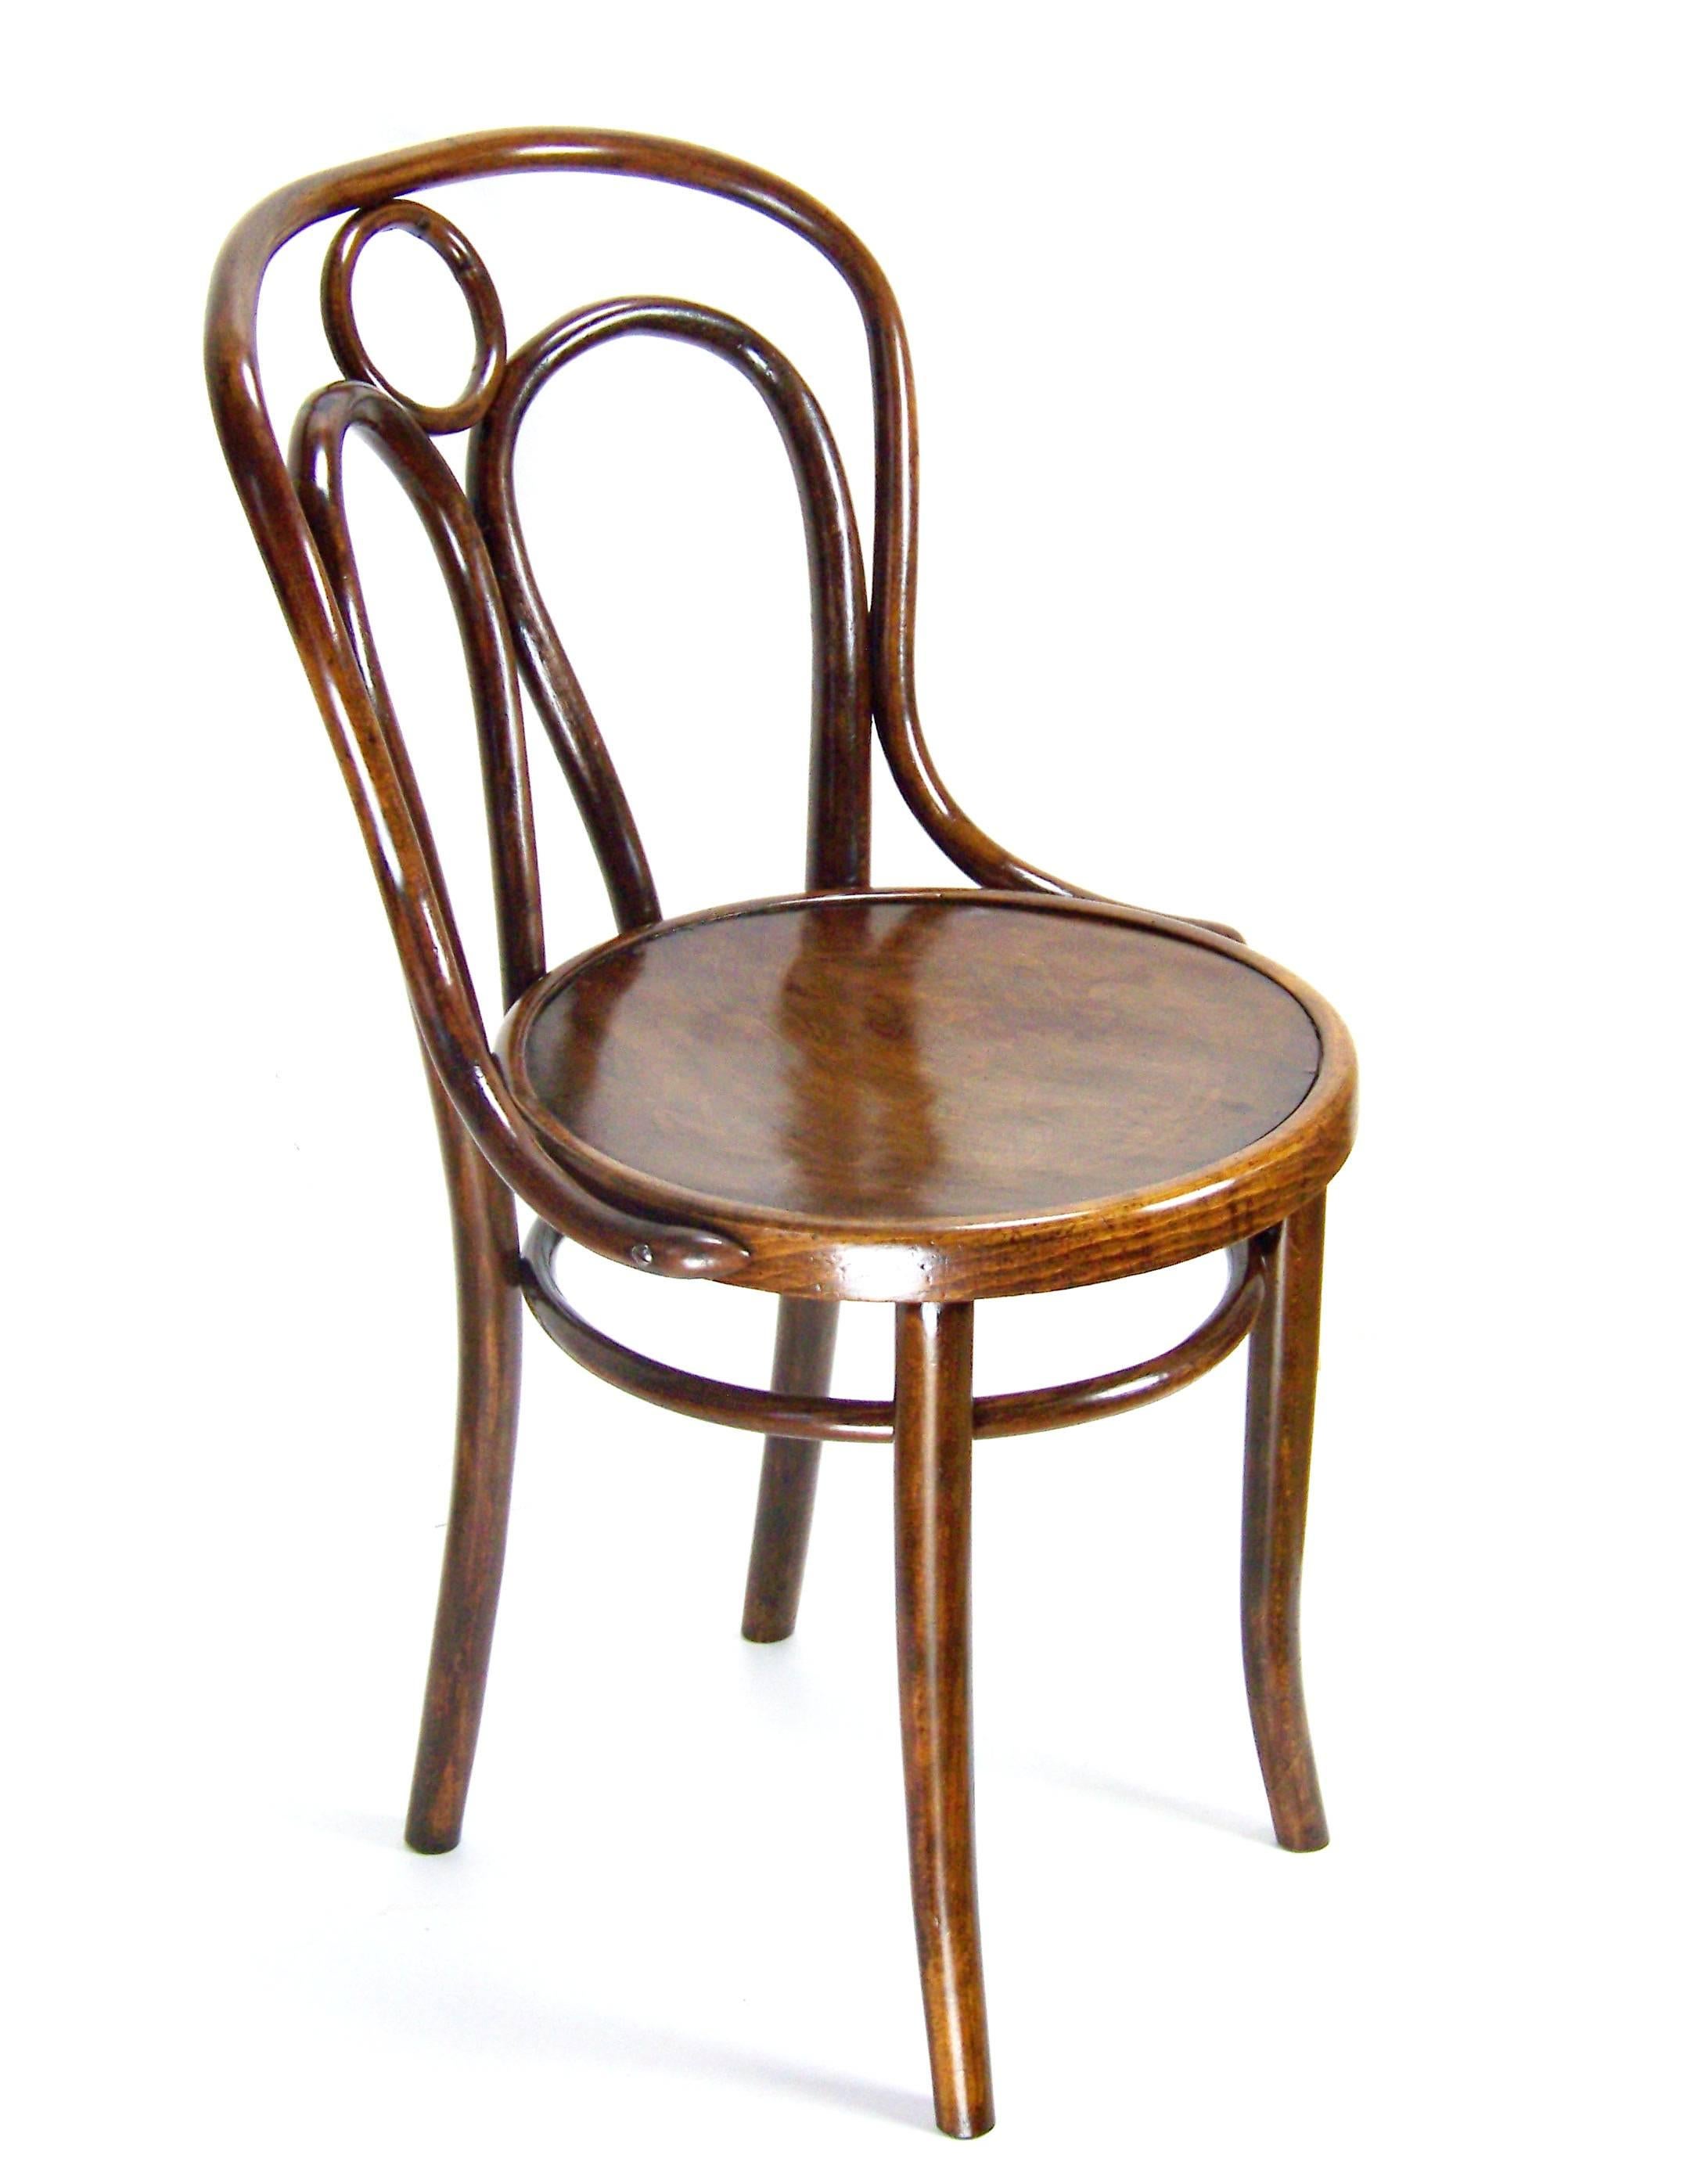 viennese chairs